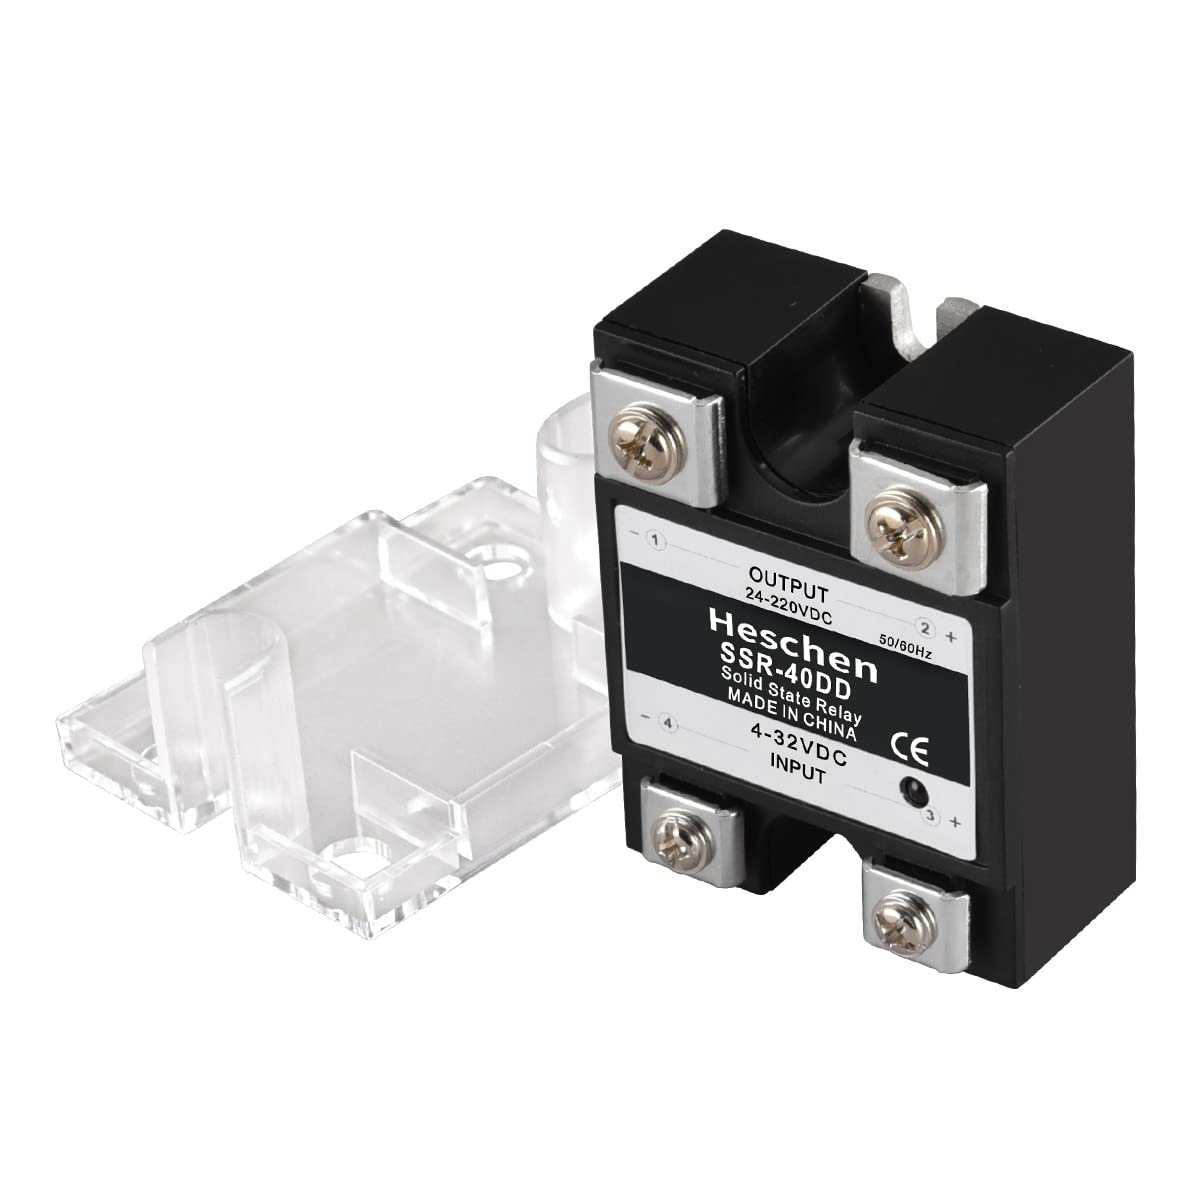 3-24VDC/5-200VDC SSR-40dd Single Phase Solid State Relay, Solid